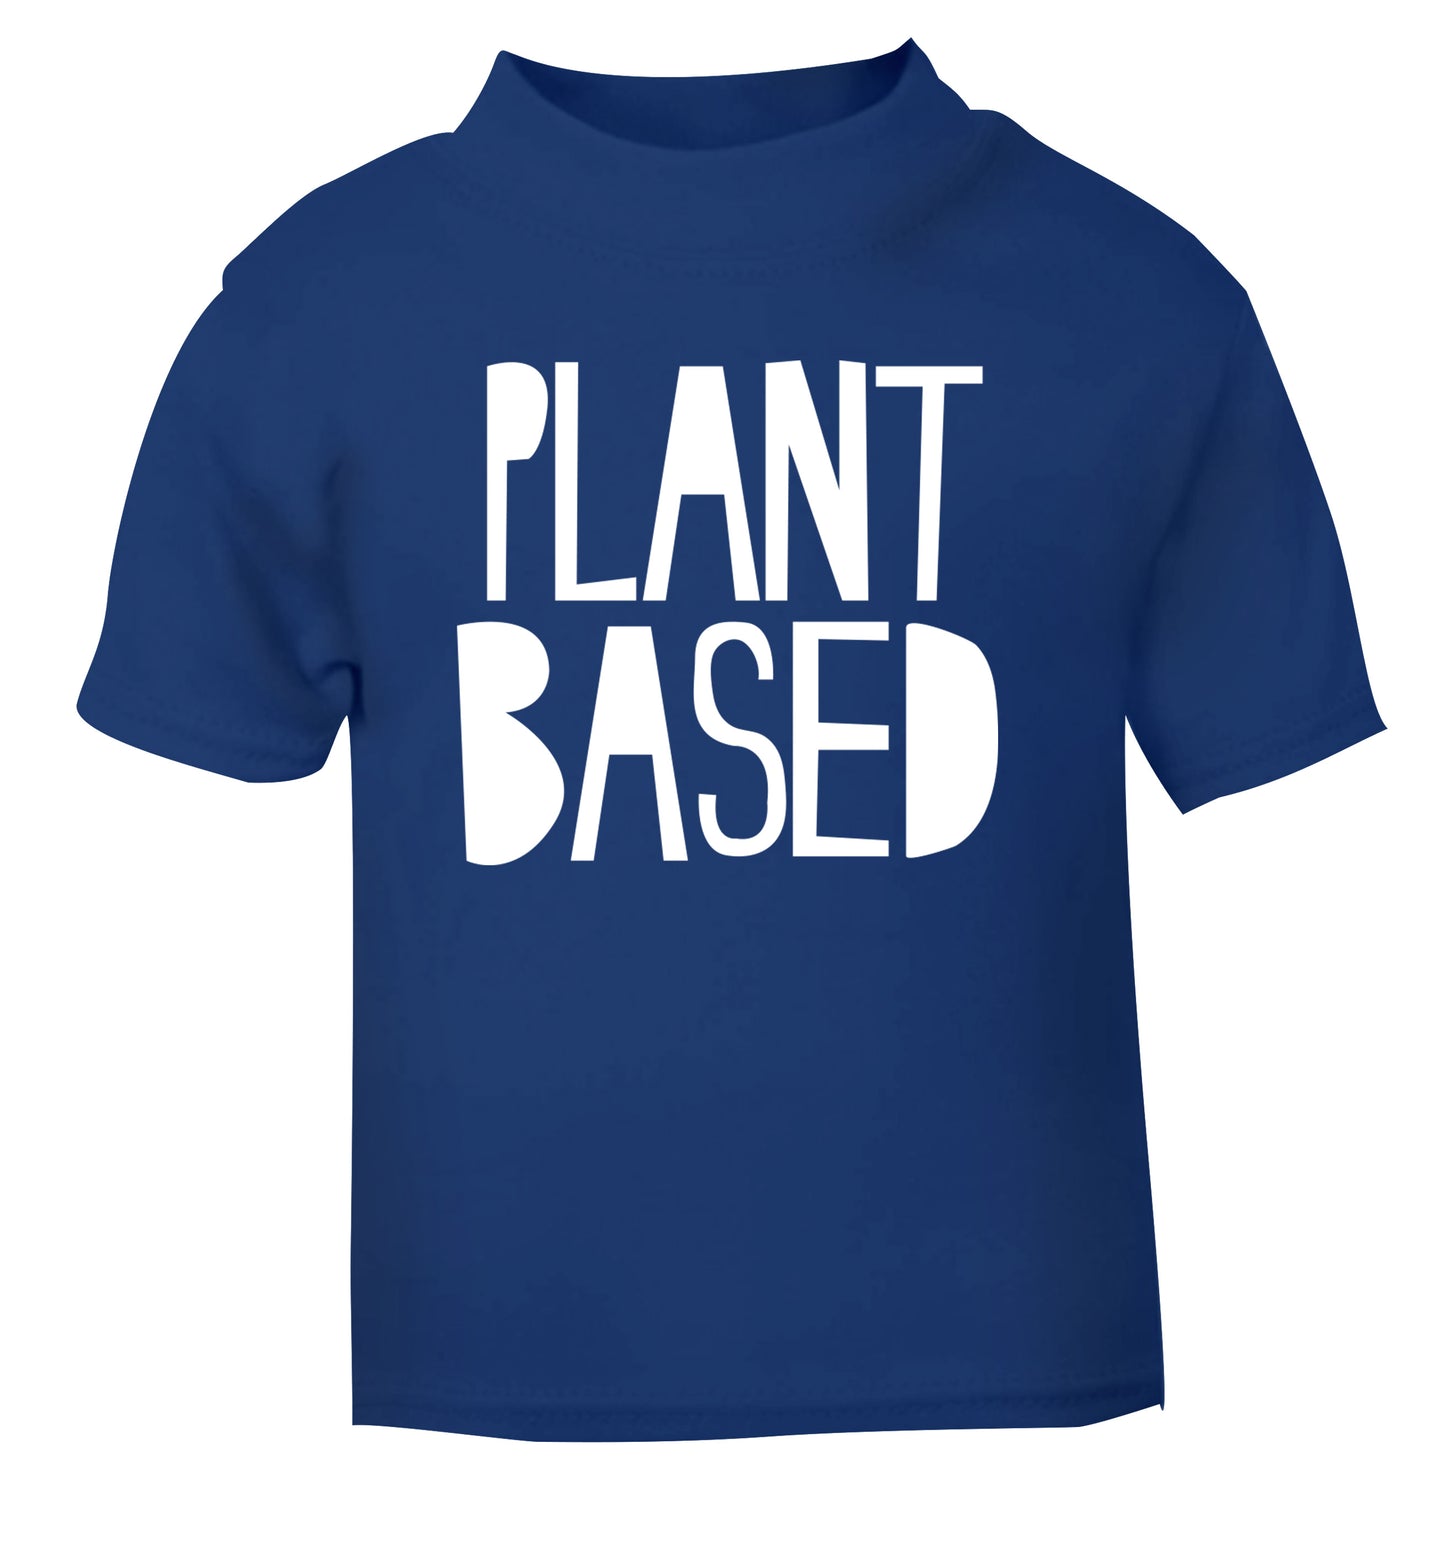 Plant Based blue Baby Toddler Tshirt 2 Years